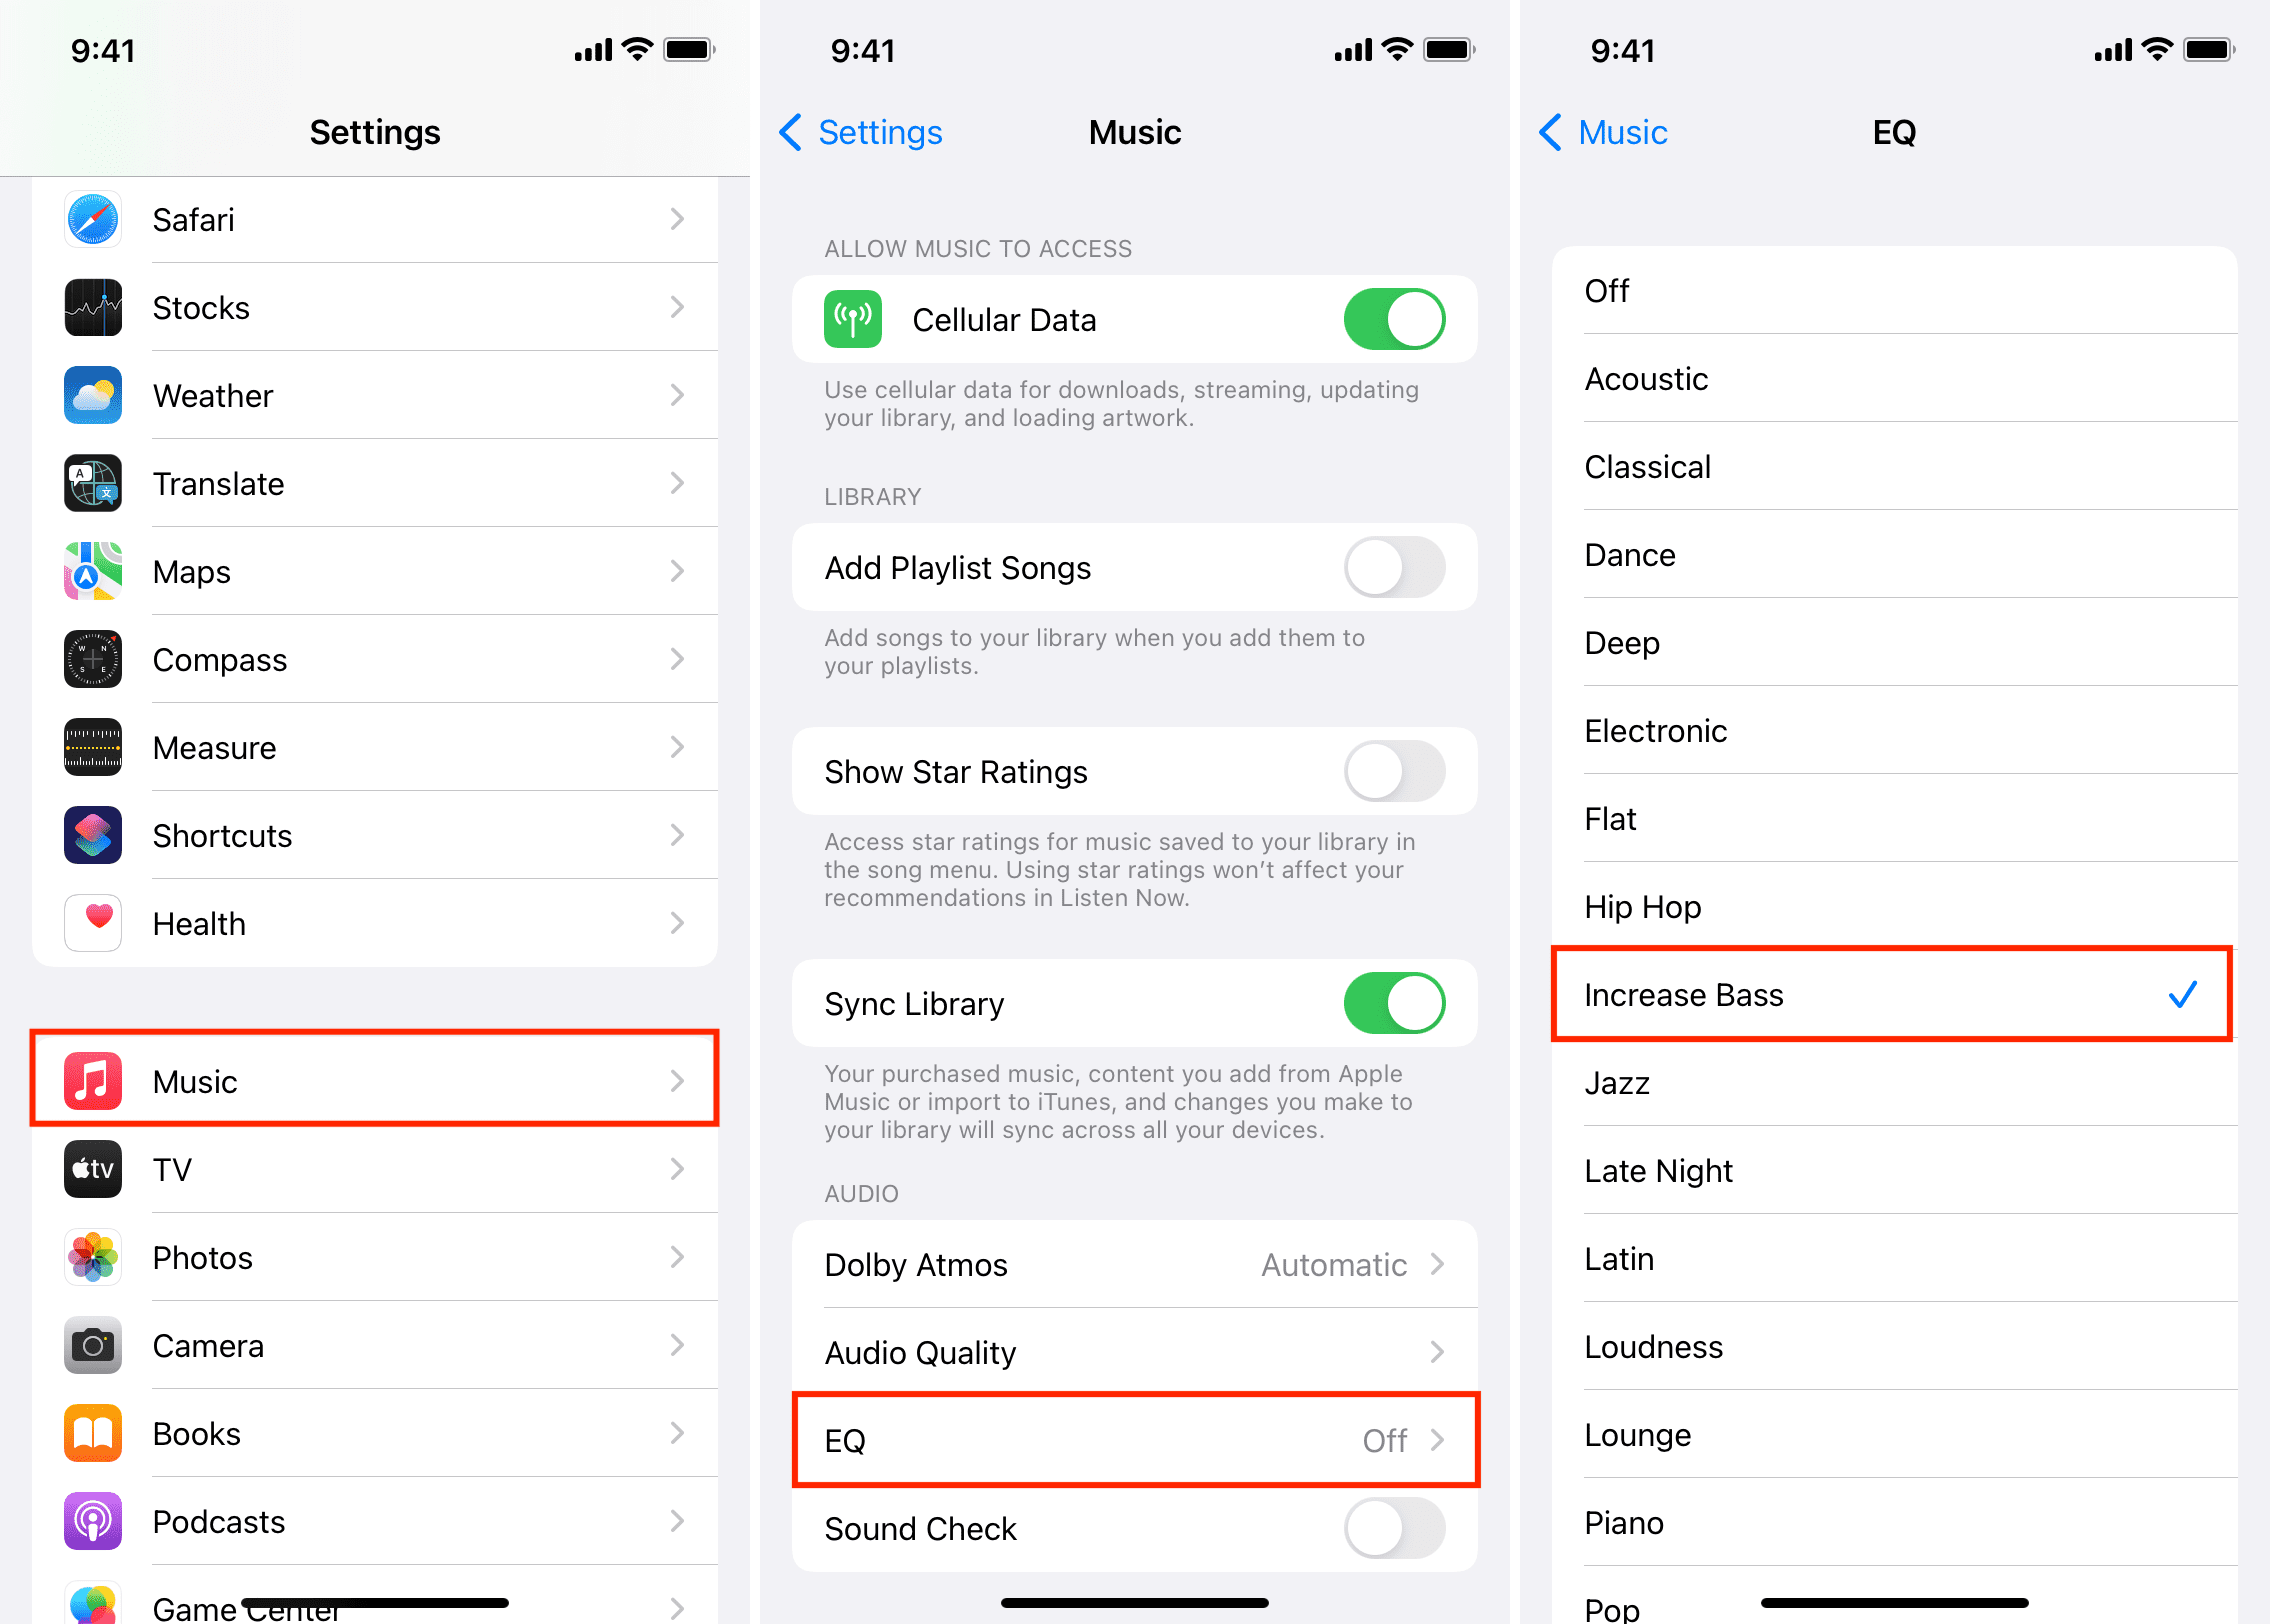 Increase Bass on iPhone from music settings